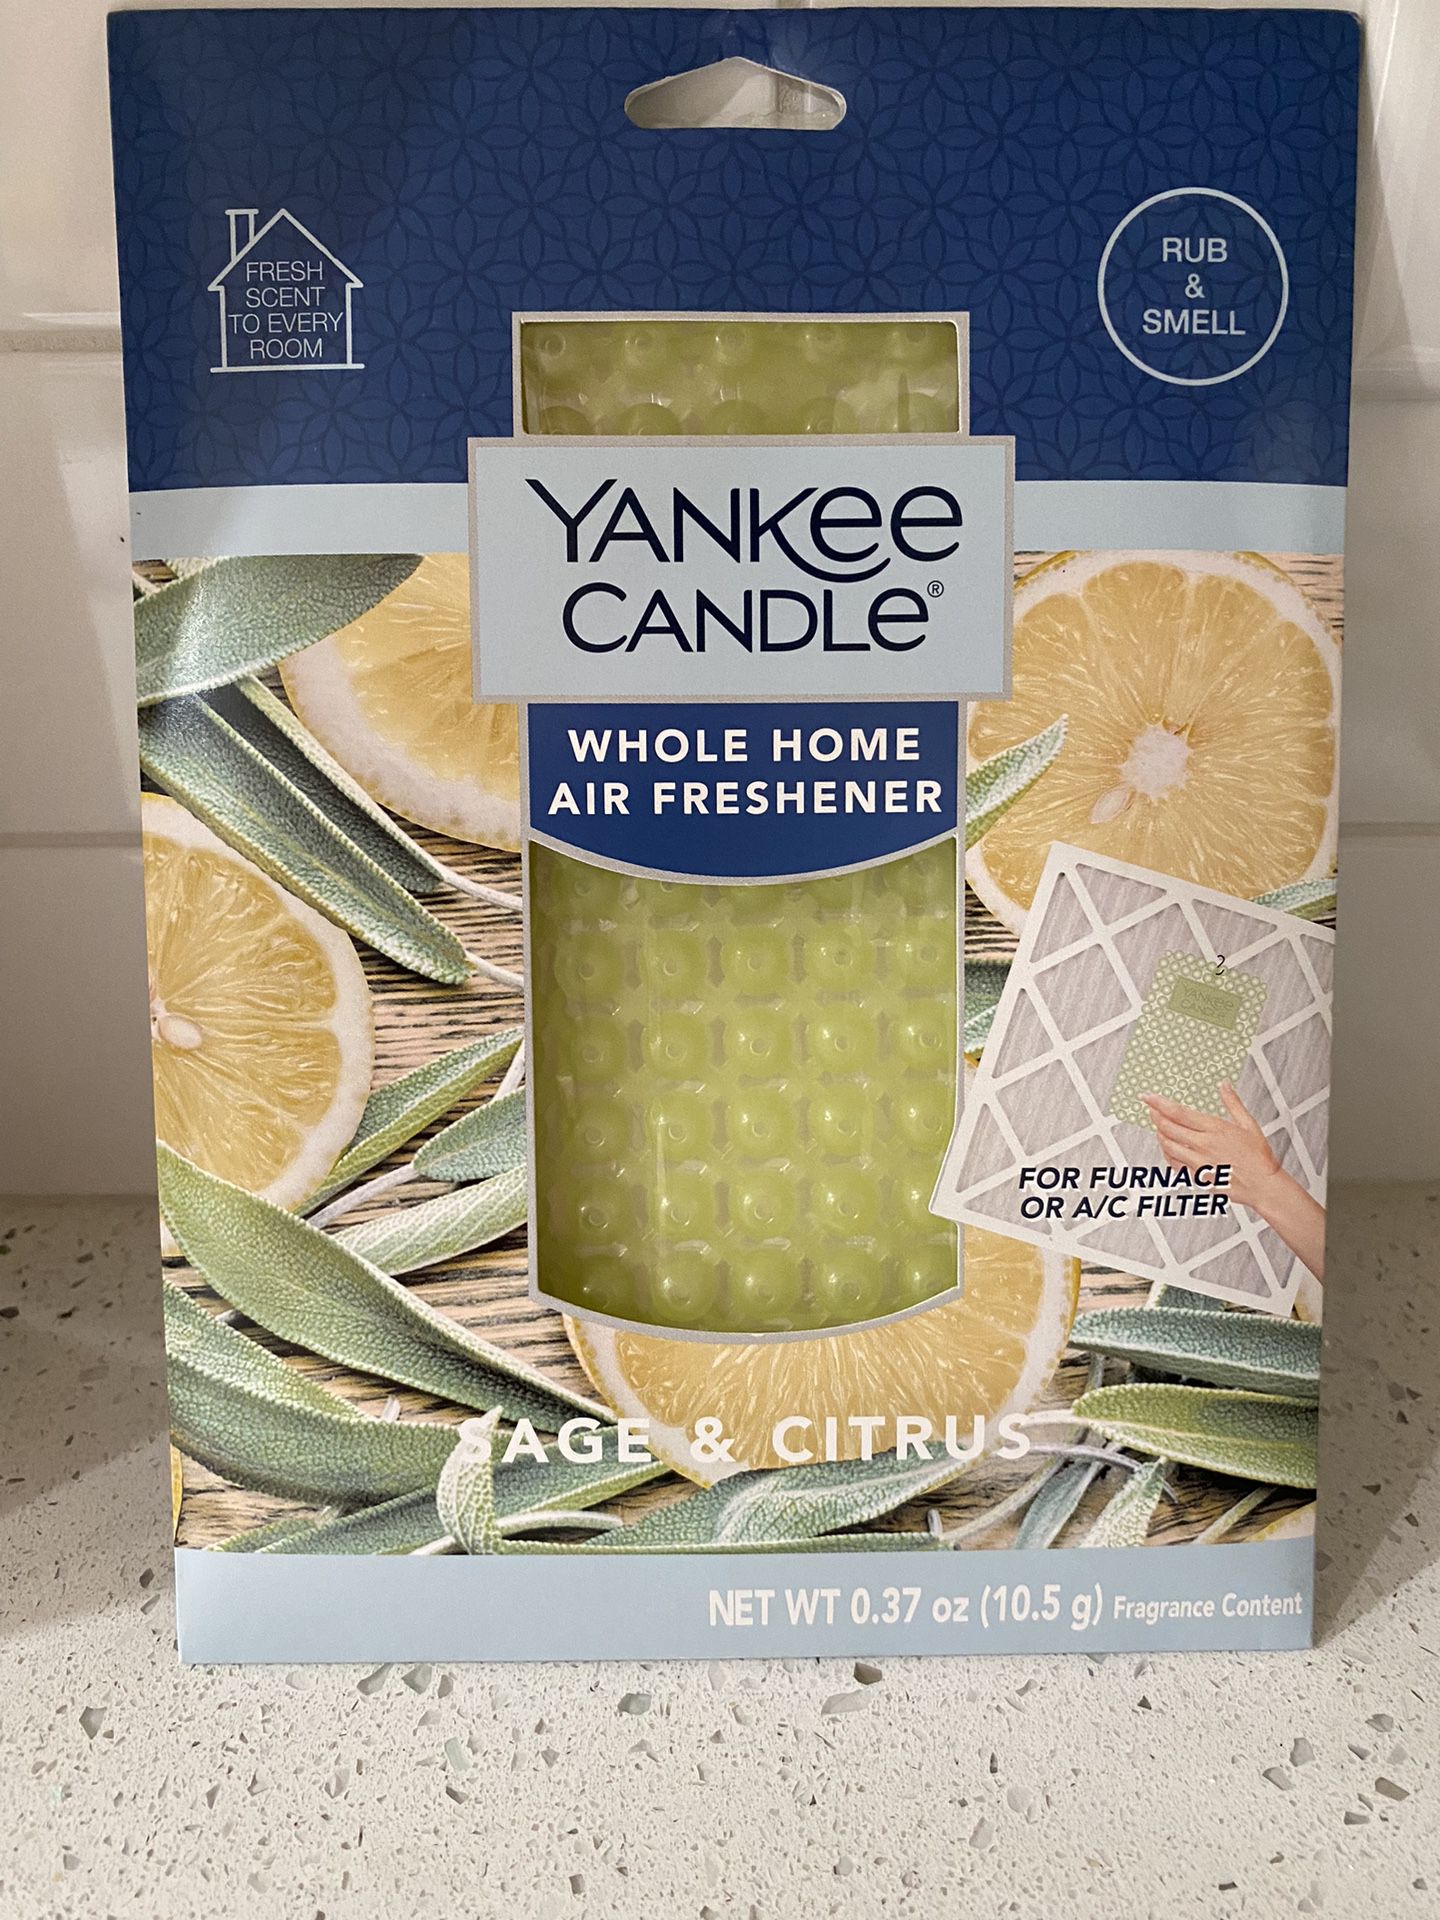 Yankee Candle Air Filter Freshener Household Items. , Womens Fashion Size Small. Allergy Sprays. Makeup Beauty Products